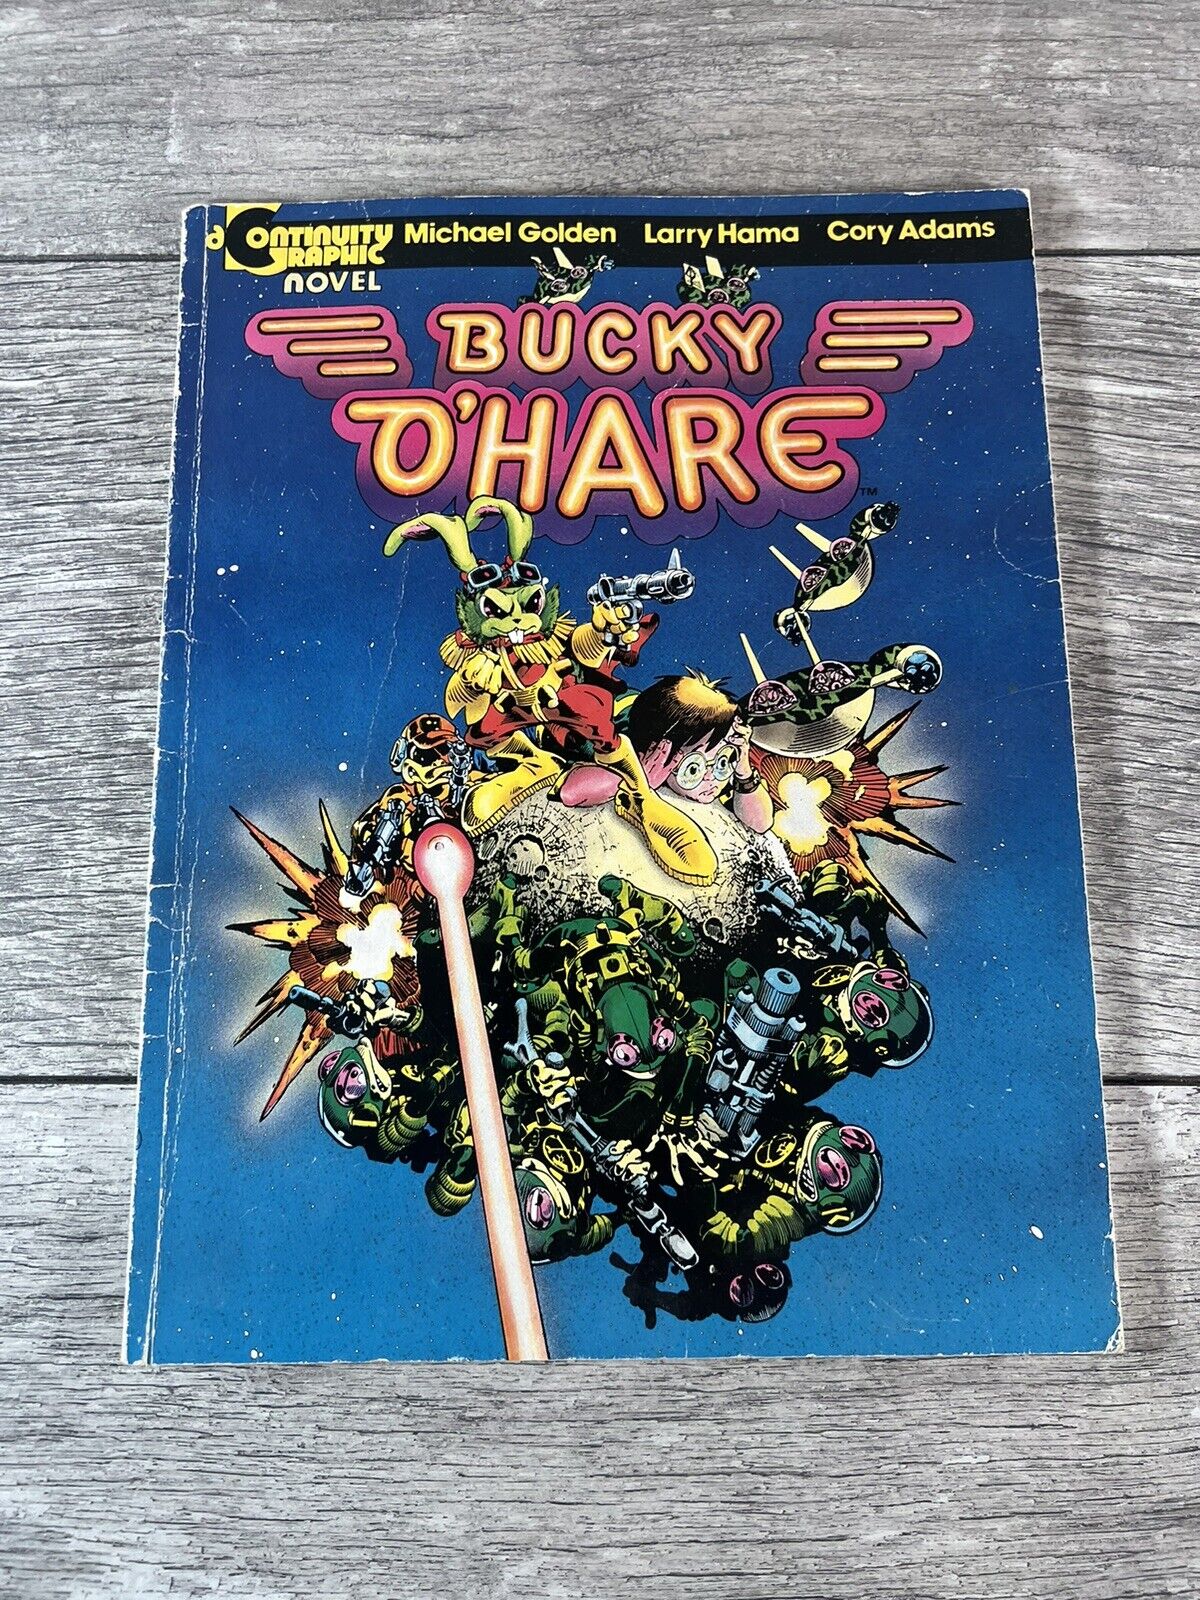 Bucky O'Hare The Graphic Novel Continuity Soft Cover Michael Golden